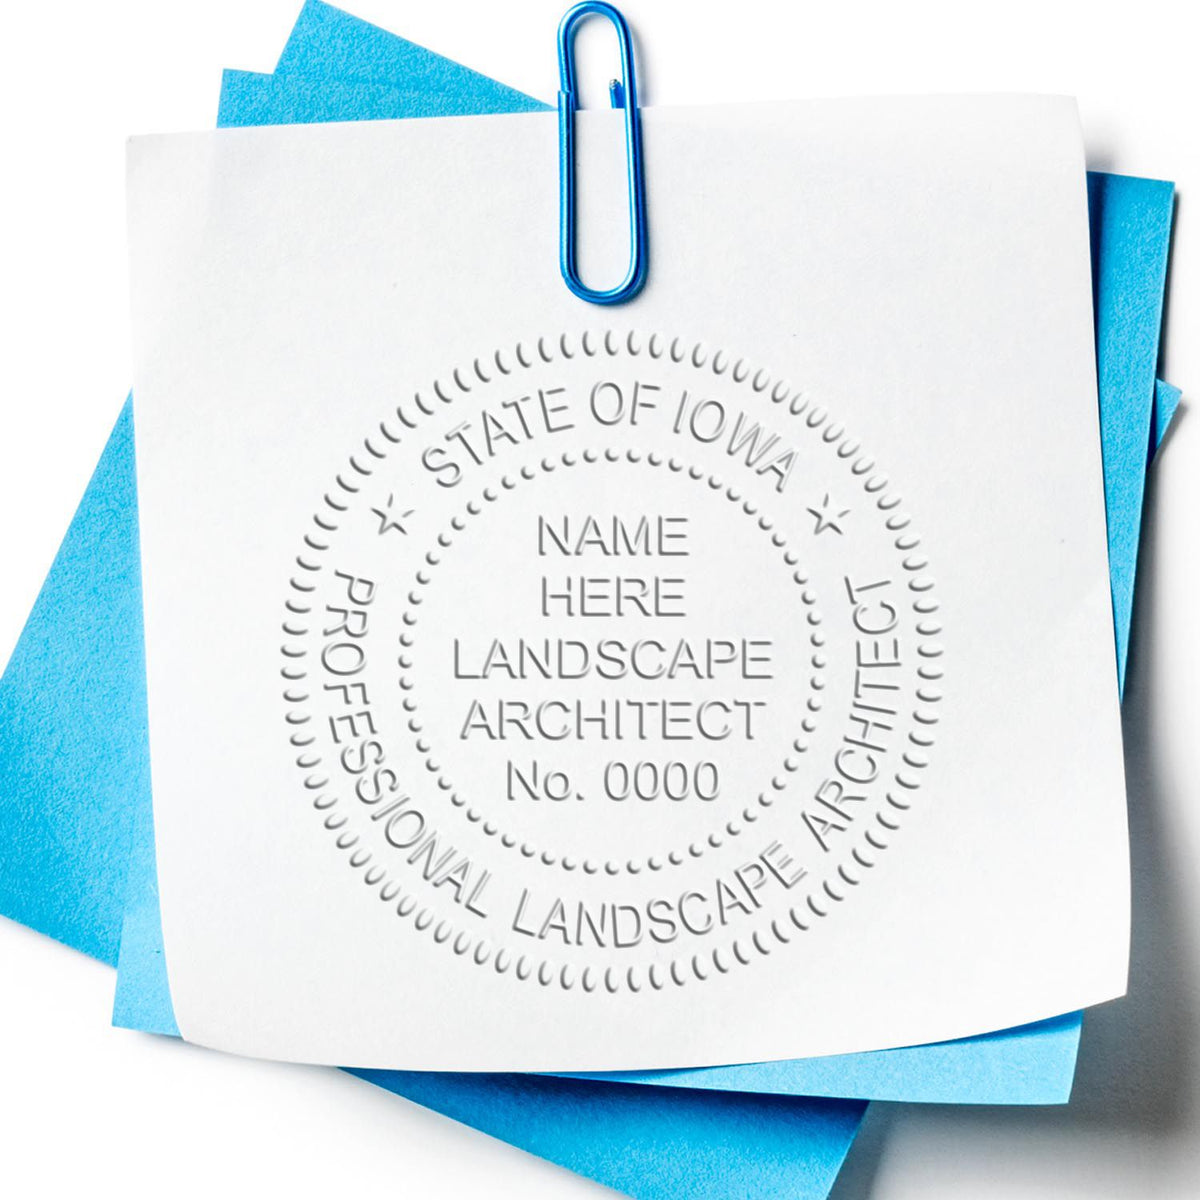 A photograph of the Hybrid Iowa Landscape Architect Seal stamp impression reveals a vivid, professional image of the on paper.